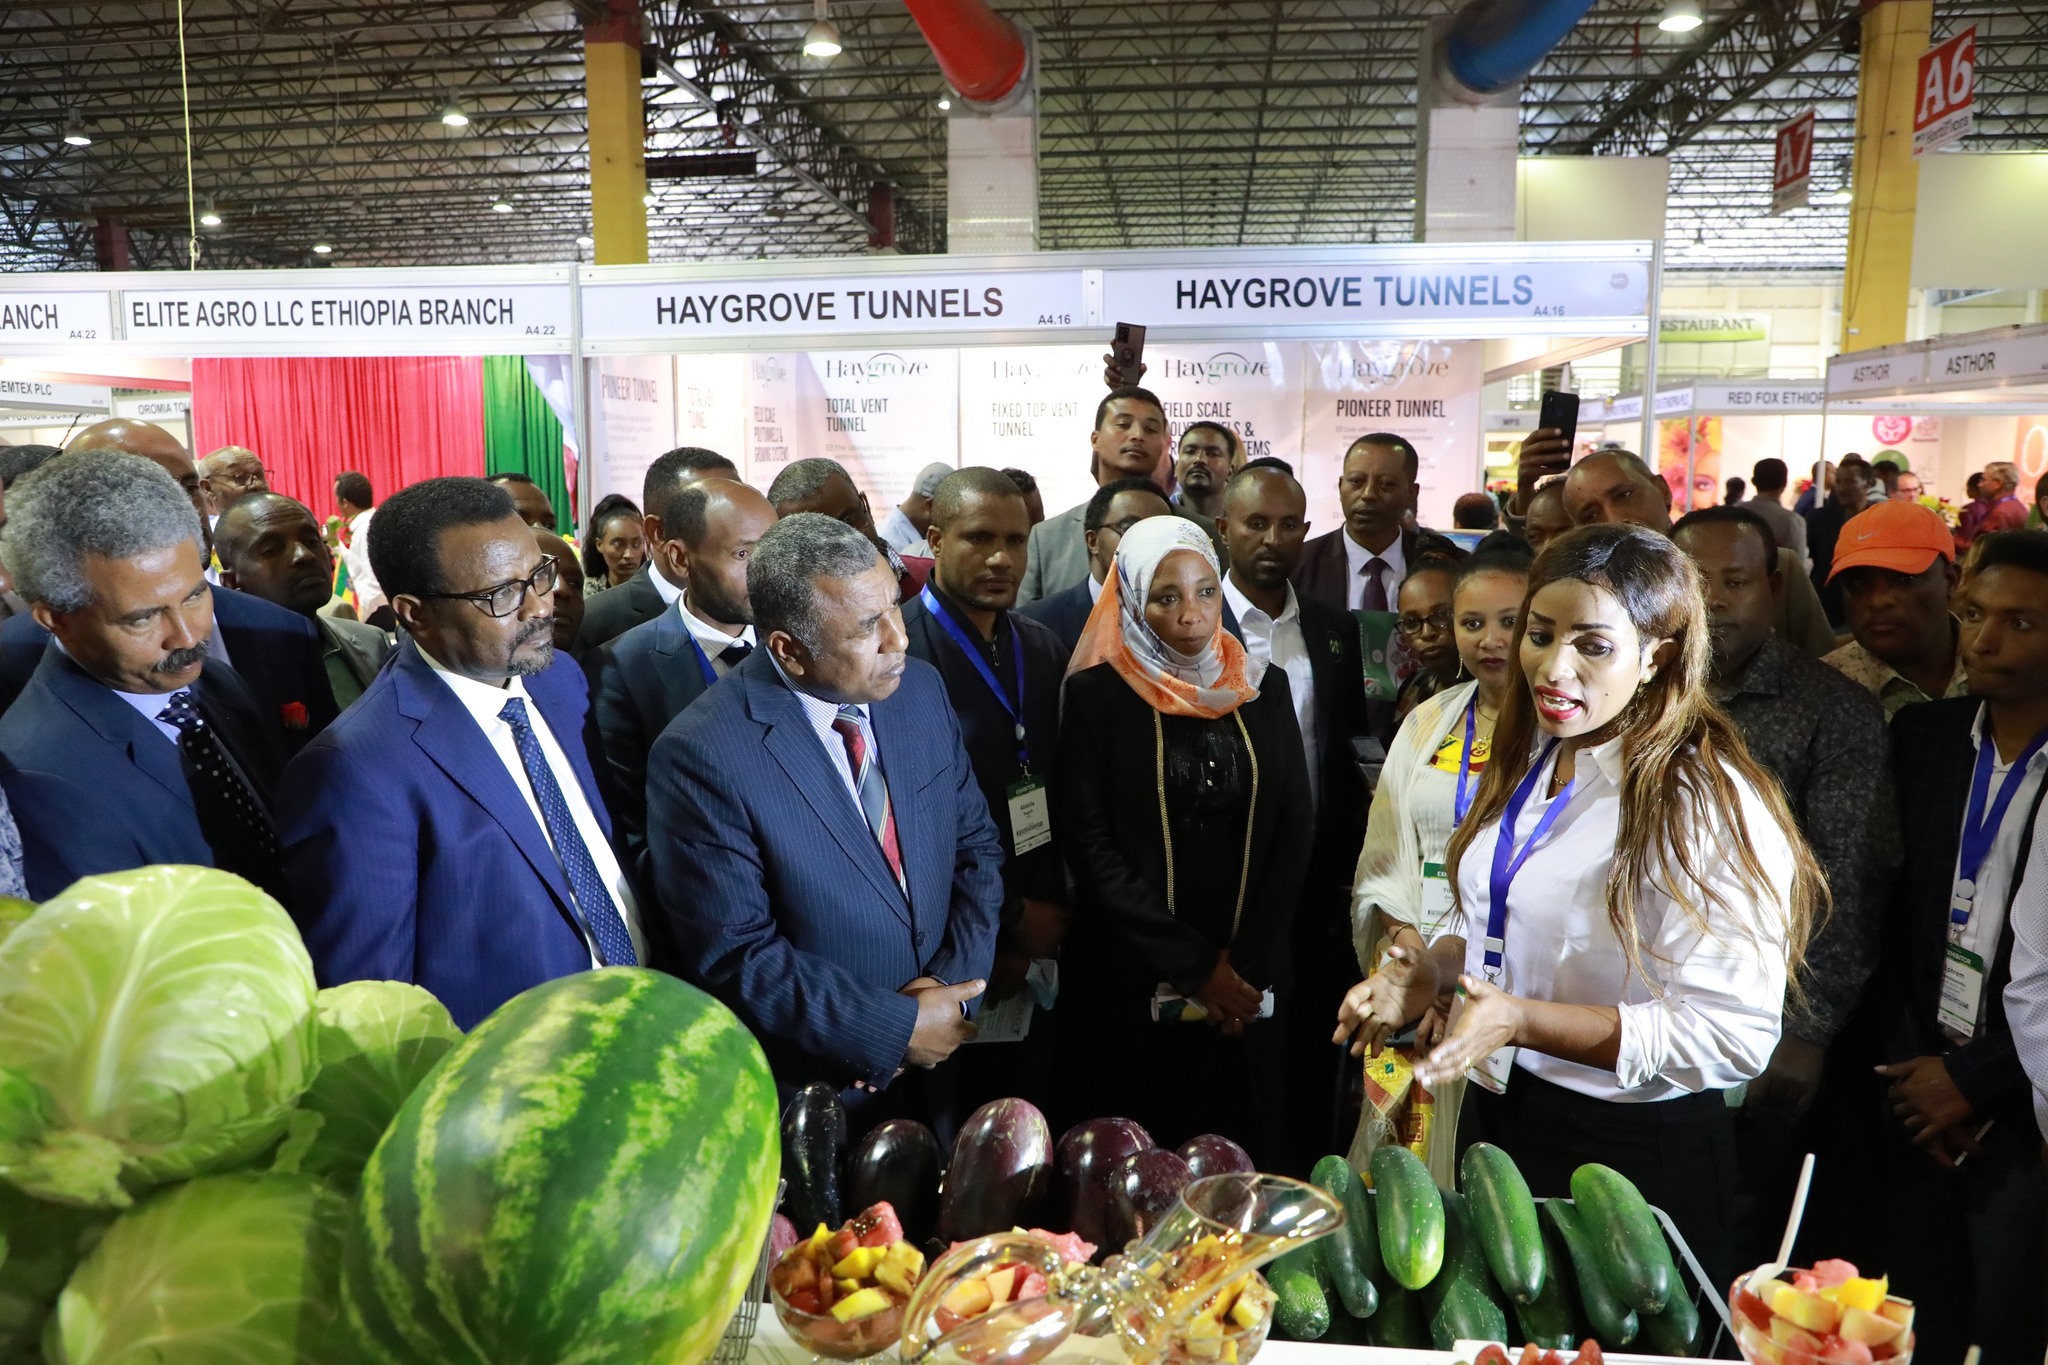 Ministry of Agriculture (MoA) has called up on all concerned stakeholders to pay a due emphasis on the fruit and vegetable sector development.